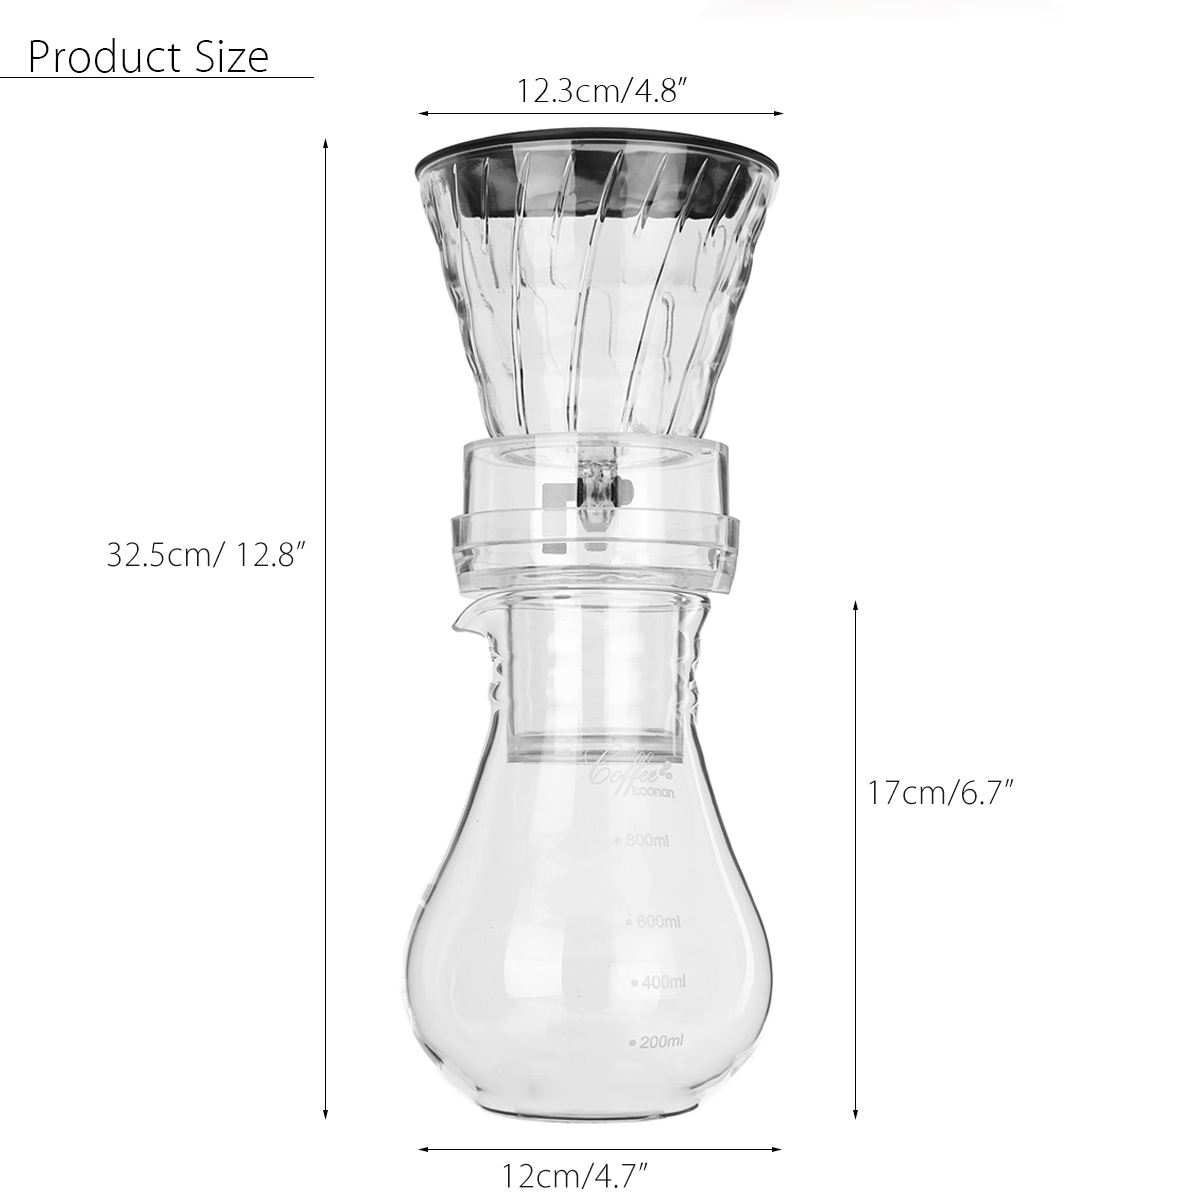 1000mL-Glass-Cold-Iced-Drip-Brew-Home-Coffee-Maker-Pot-Pour-Over-Coffee-Maker-1315102